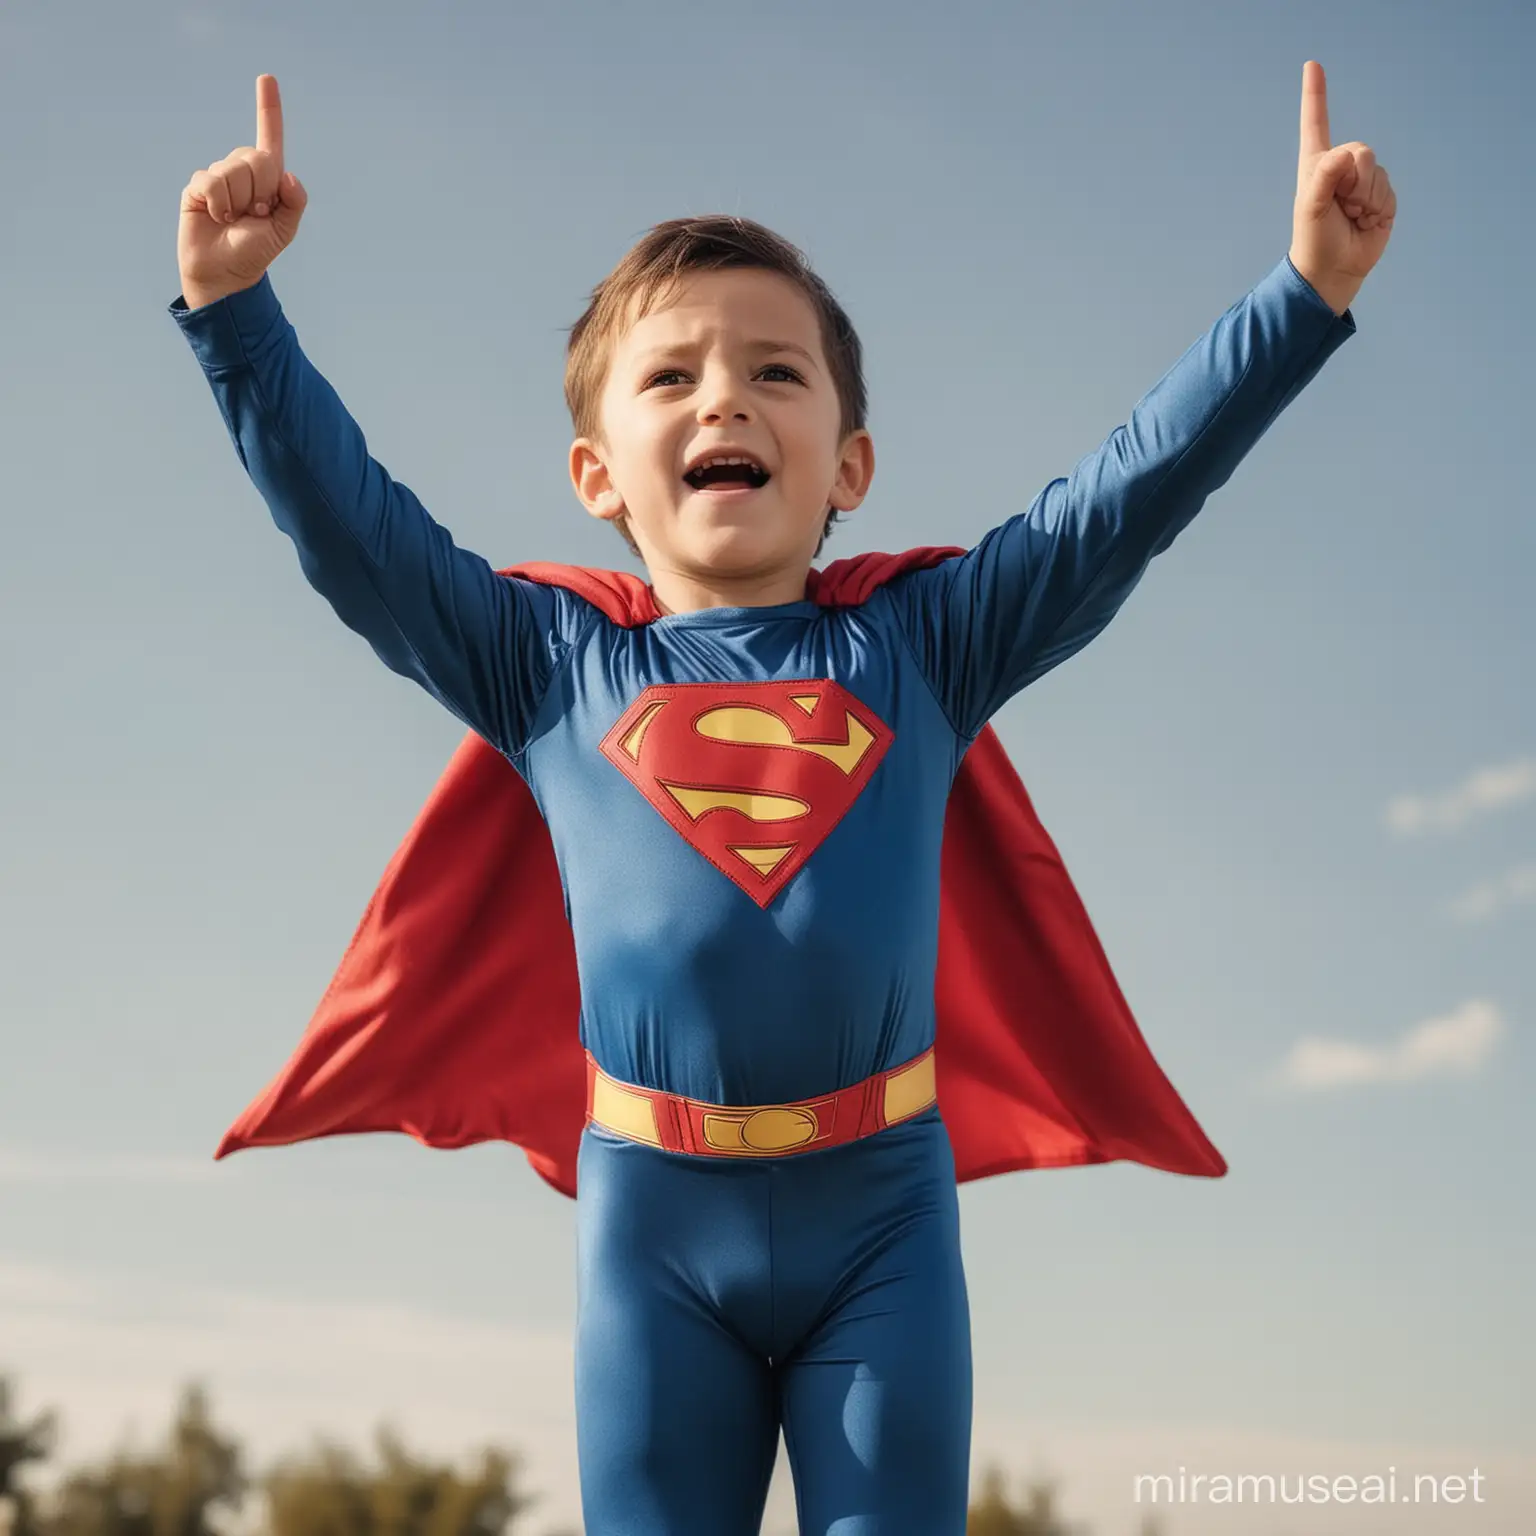 ADHD child i superman costume and raising hand to the sky in a flight